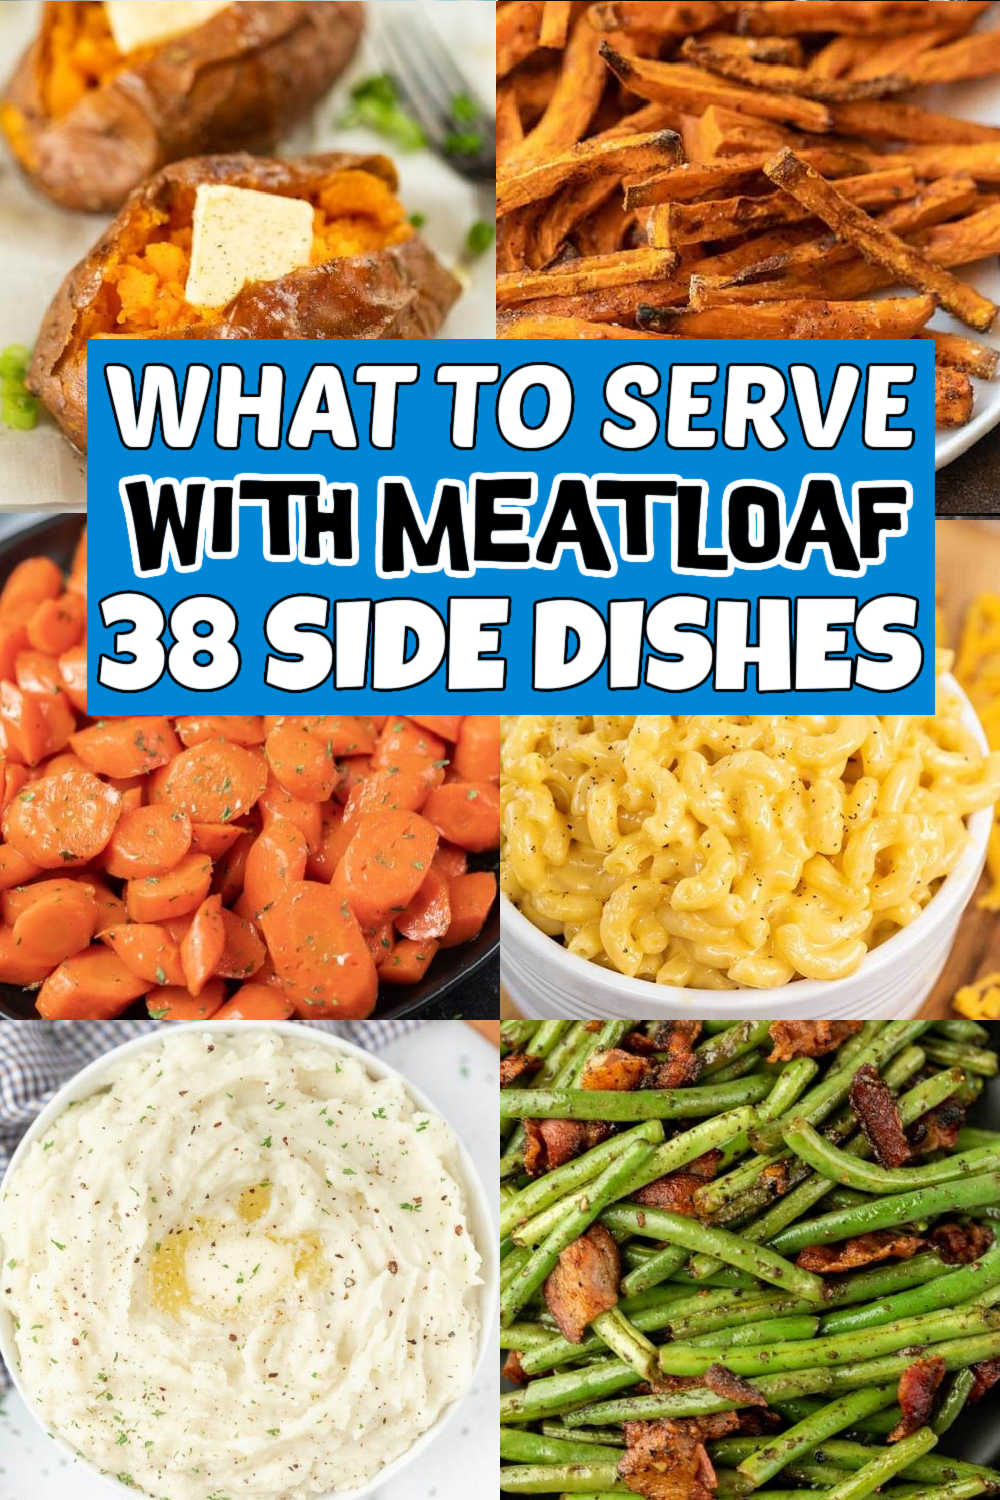 If you are wondering What to Serve with Meatloaf here are 38 easy side dishes that are simple to make. Quick and easy side dish recipes. We love making Meatloaf for a delicious Sunday night meal. These are the best sides for meatloaf that we like to complete our meal with. #eatingonadime #whattoservewithmeatloaf #meatloaf #sidedishes